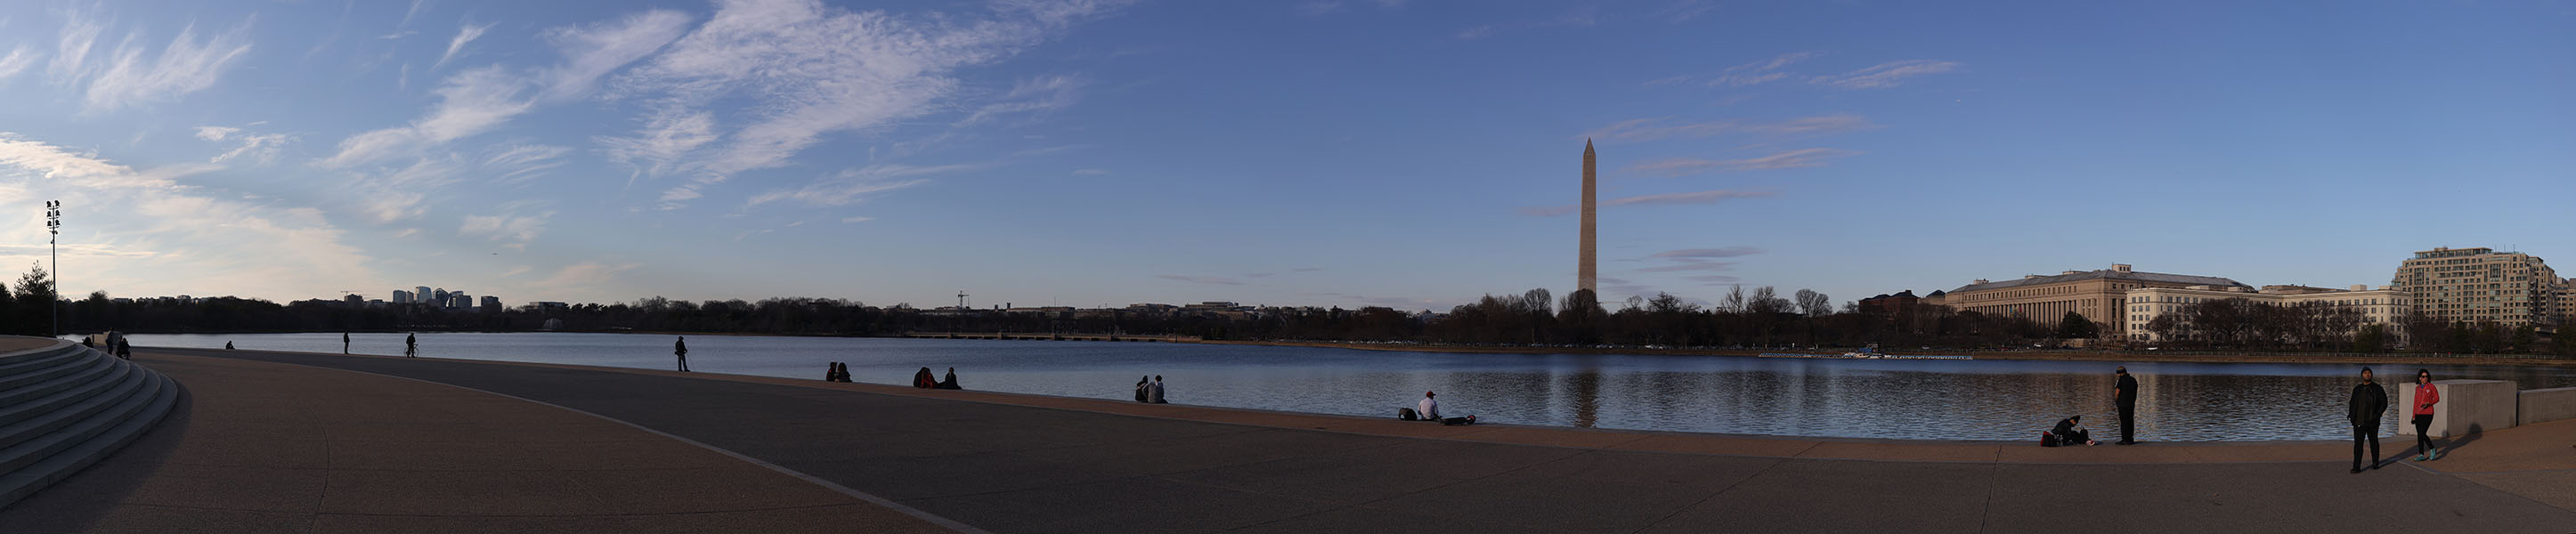 Panorama of Tidal Basin From the Jefferson Memorial with Washington Monument in Background.